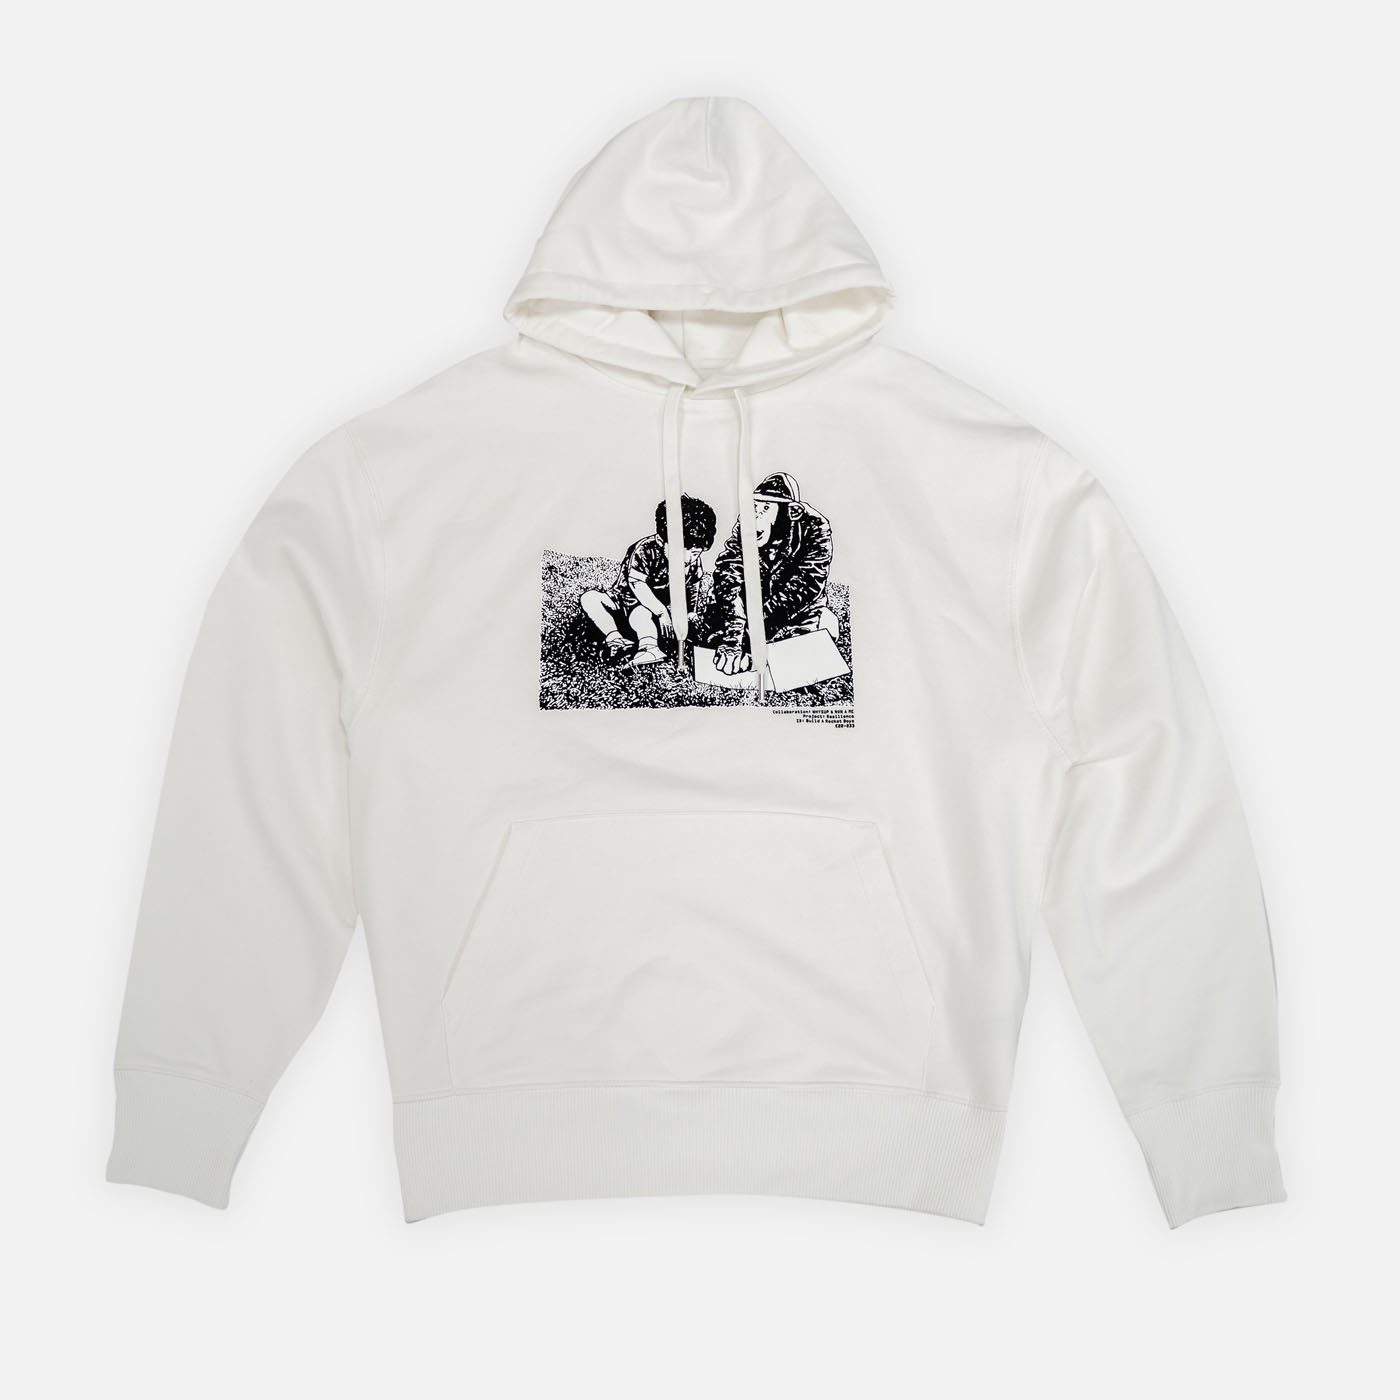 Limited Edition “Resilience” Off White Hoodie - Whysup